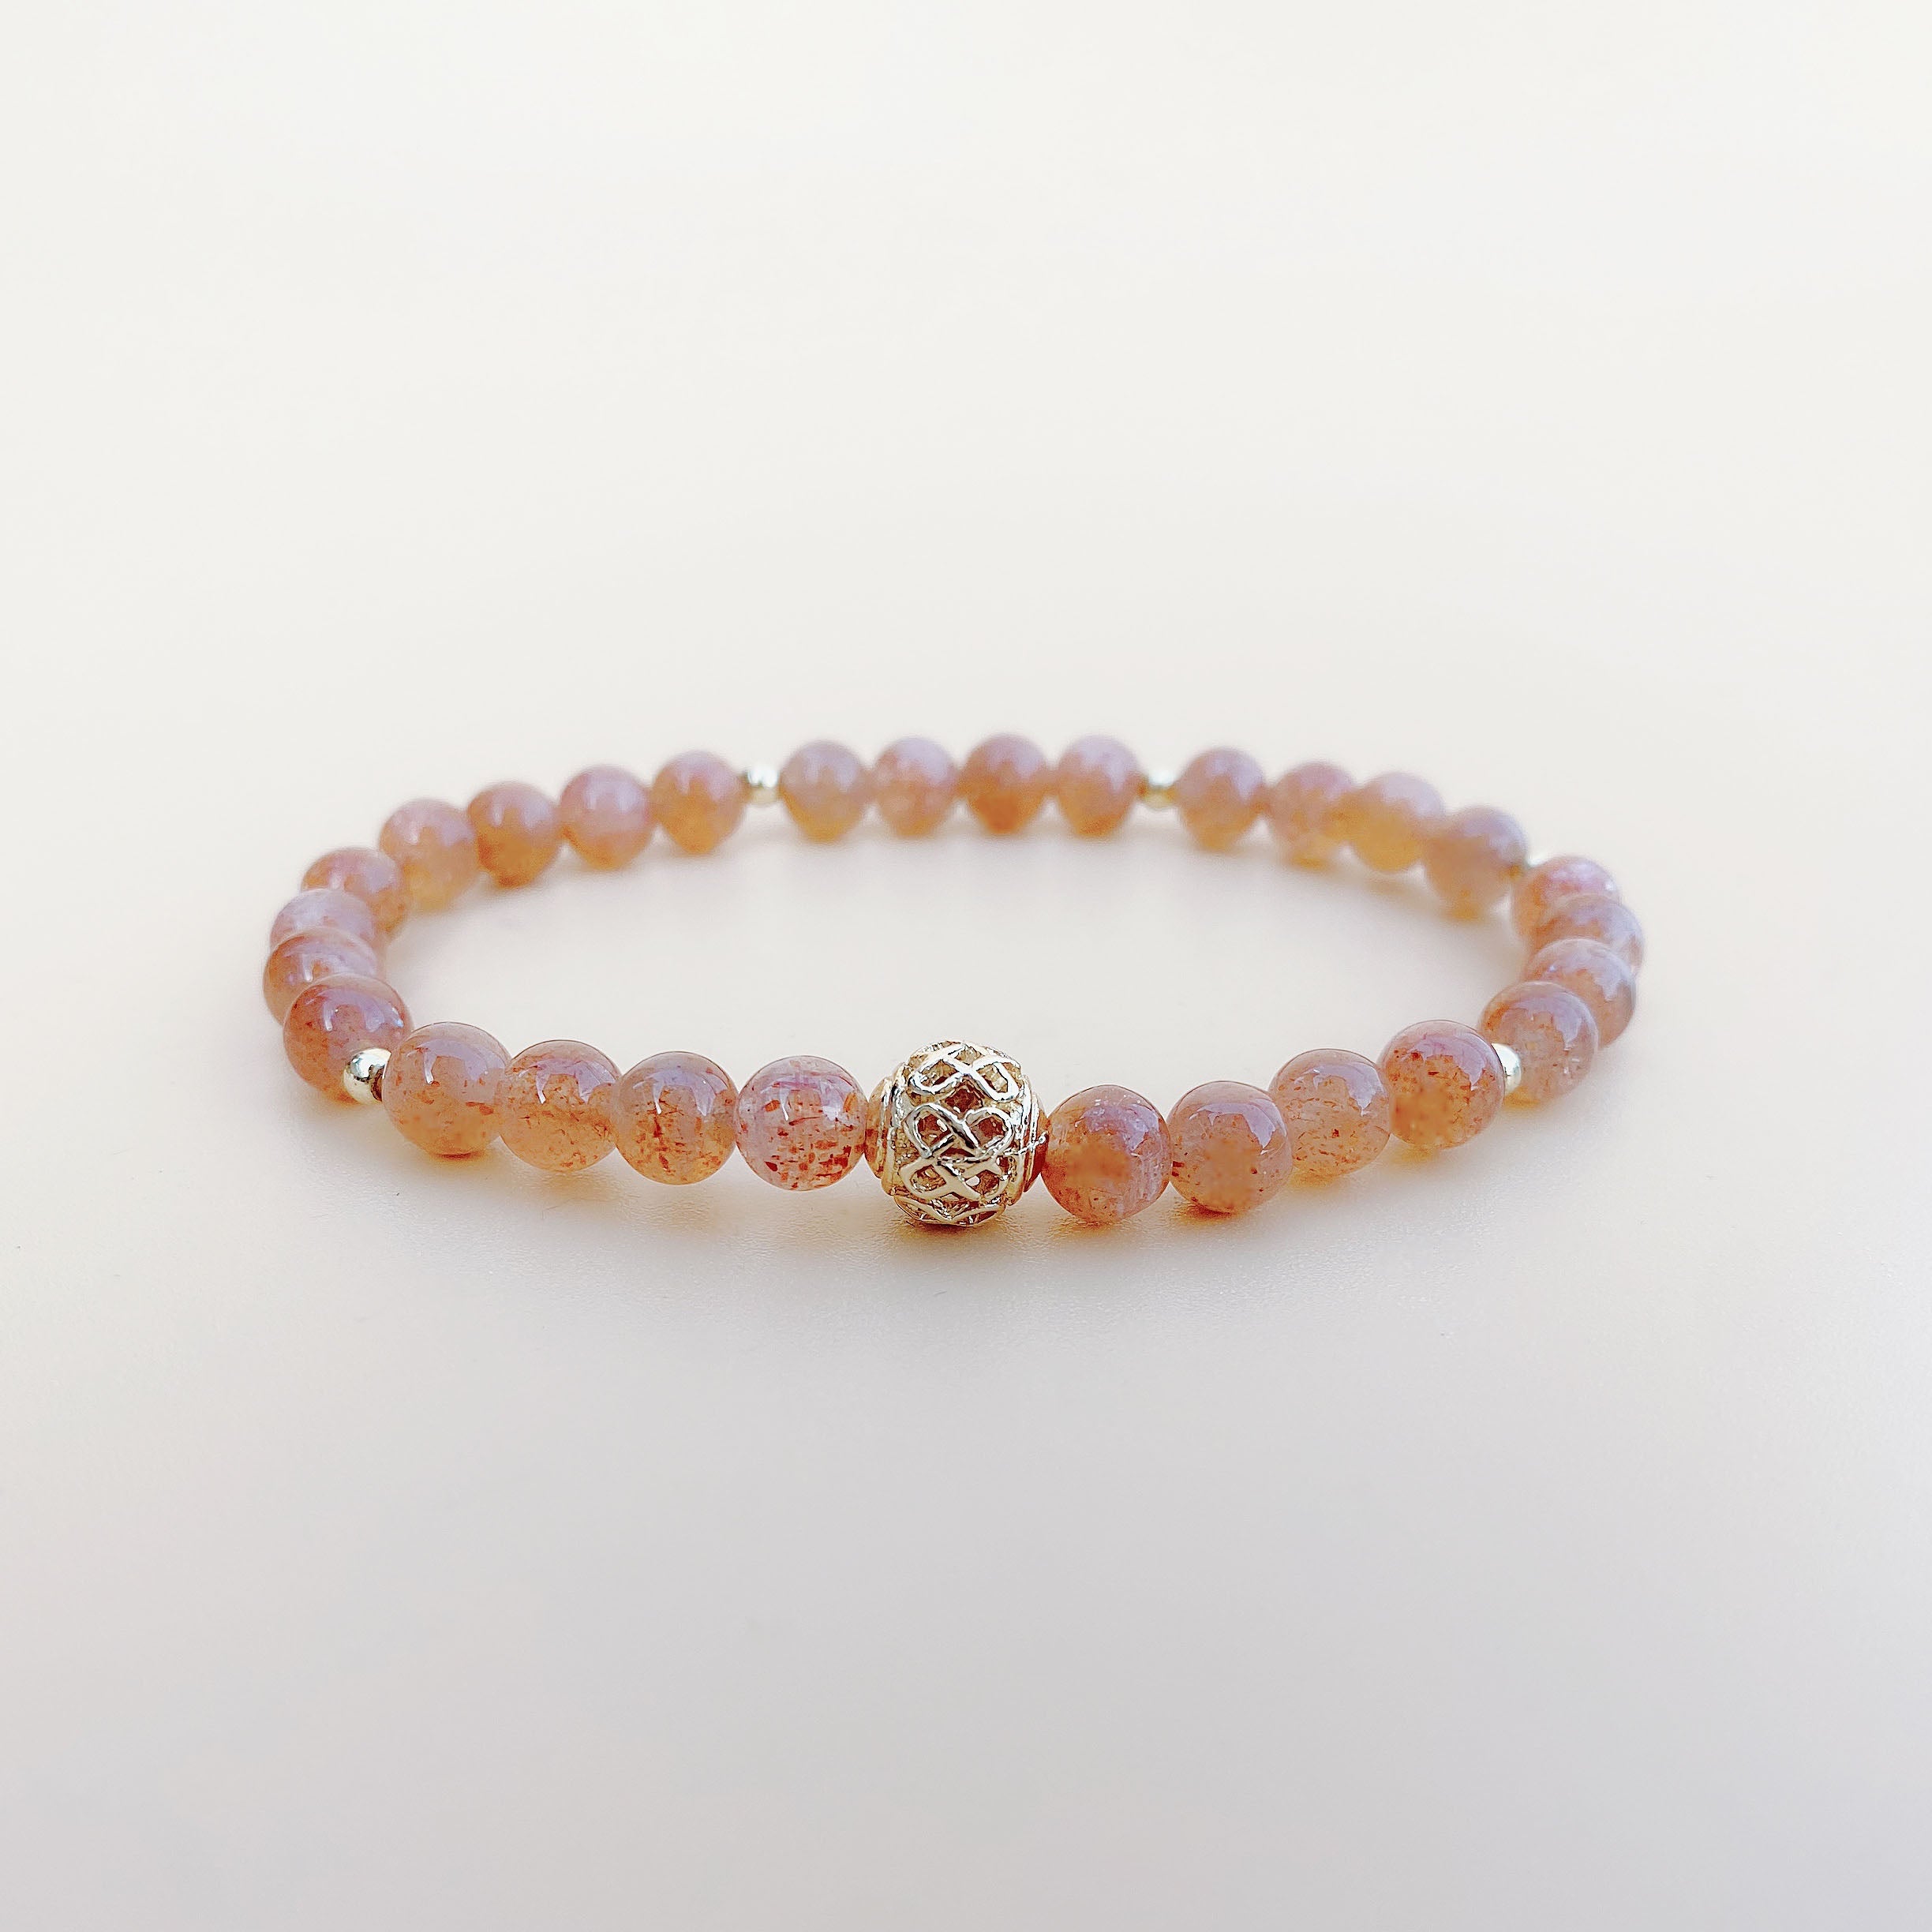 Sunstone | Stretchy Cord Healing Crystal Bracelet w/ Gold Plated Spacers | Choose Correct Wrist Size